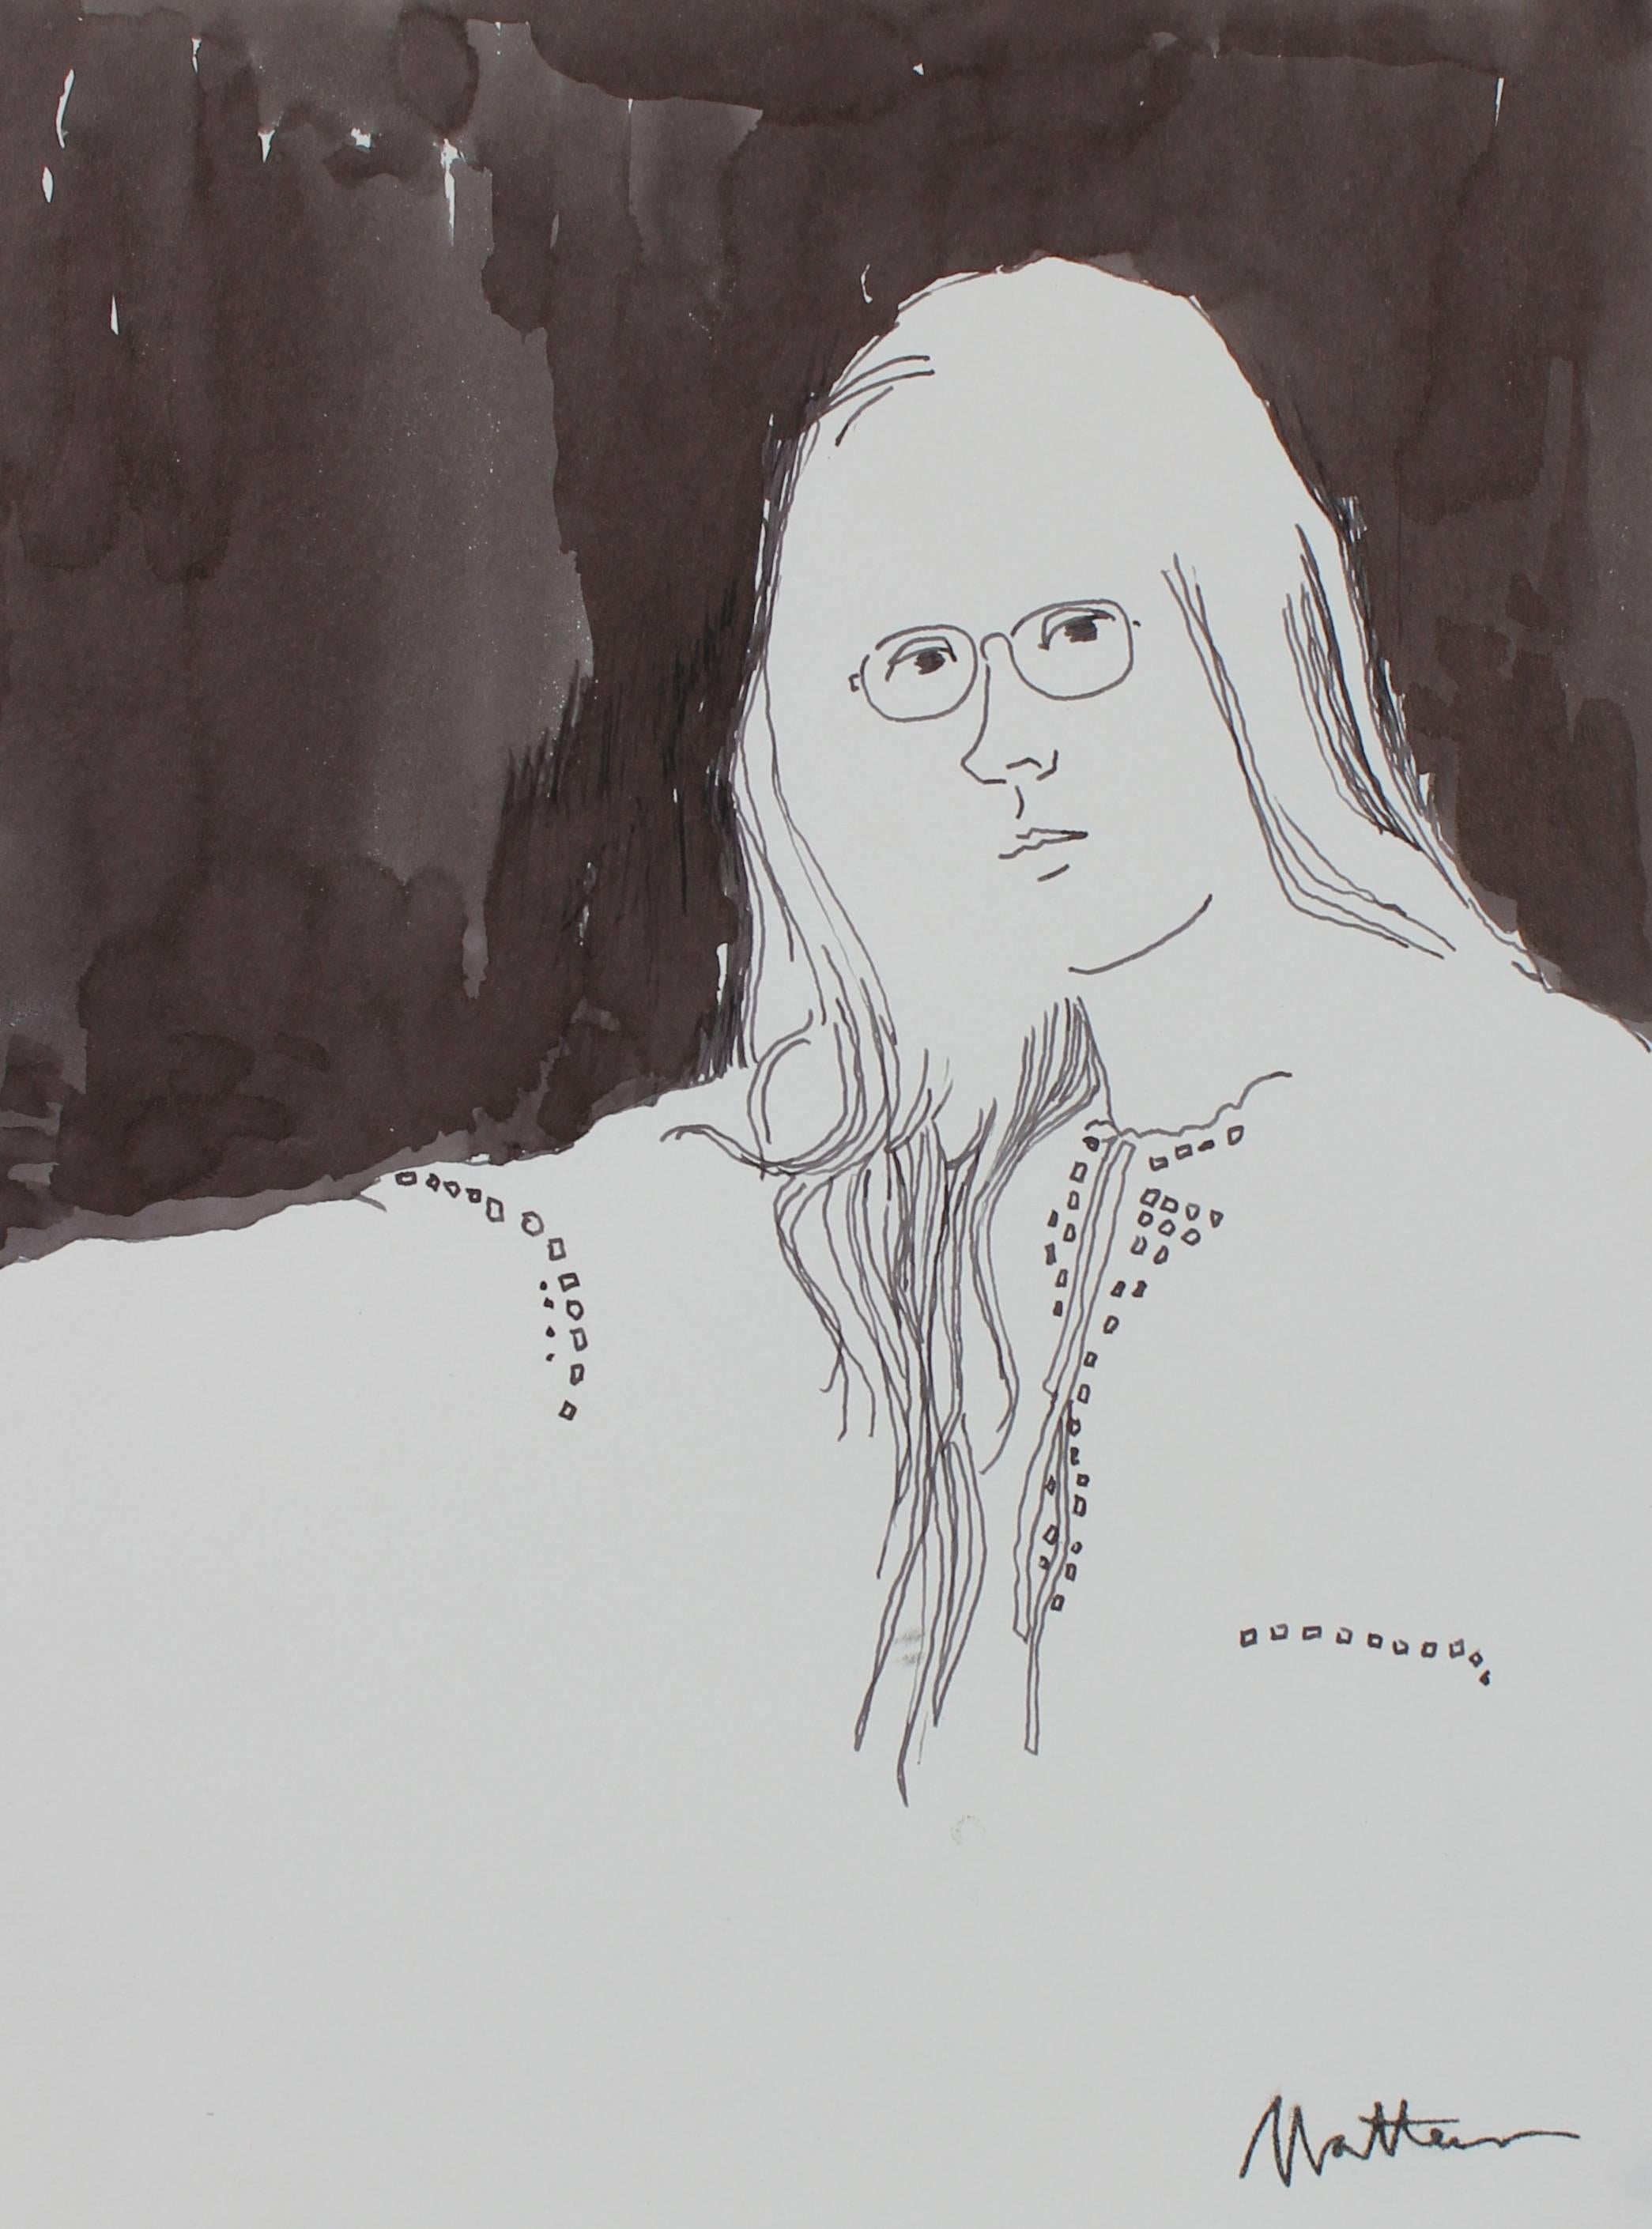 Monochromatic Portrait of a Woman with Glasses in Ink, Late 20th Century